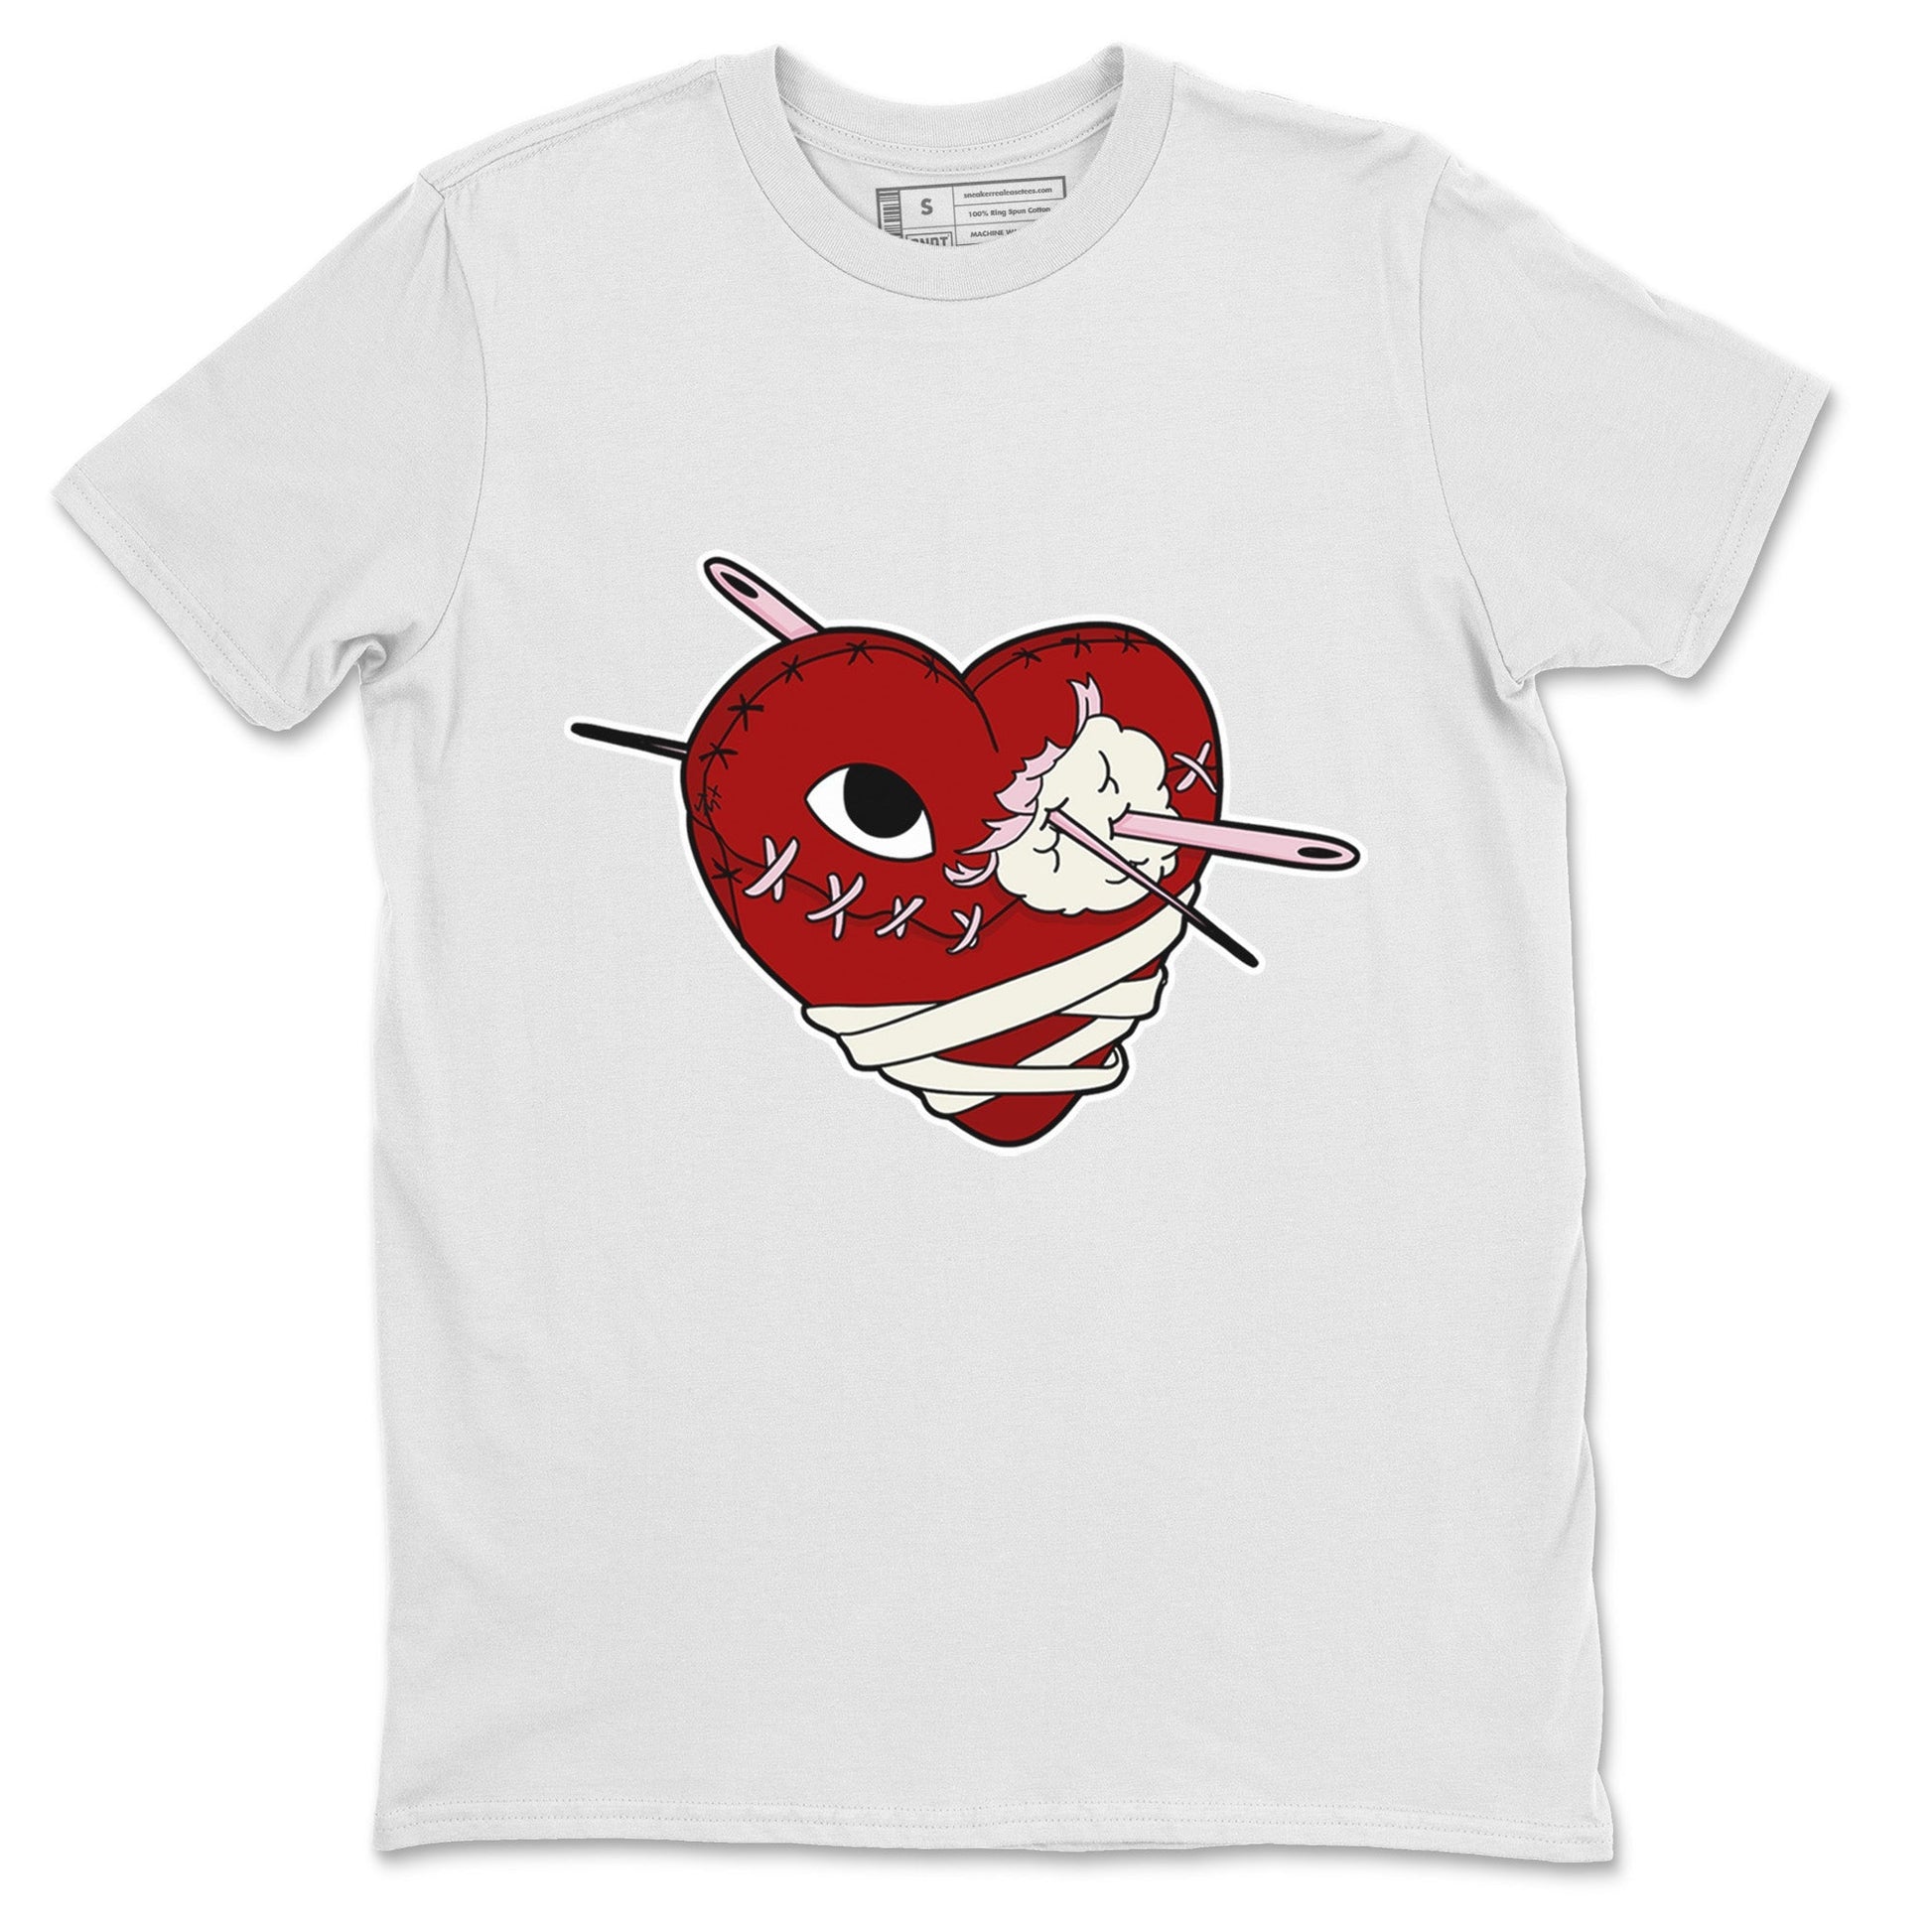 Air Force 1 Valentines Day Sneaker Match Tees Hurt Heart Sneaker Tees Air Force 1 Valentines Day Sneaker Release Tees Unisex Shirts